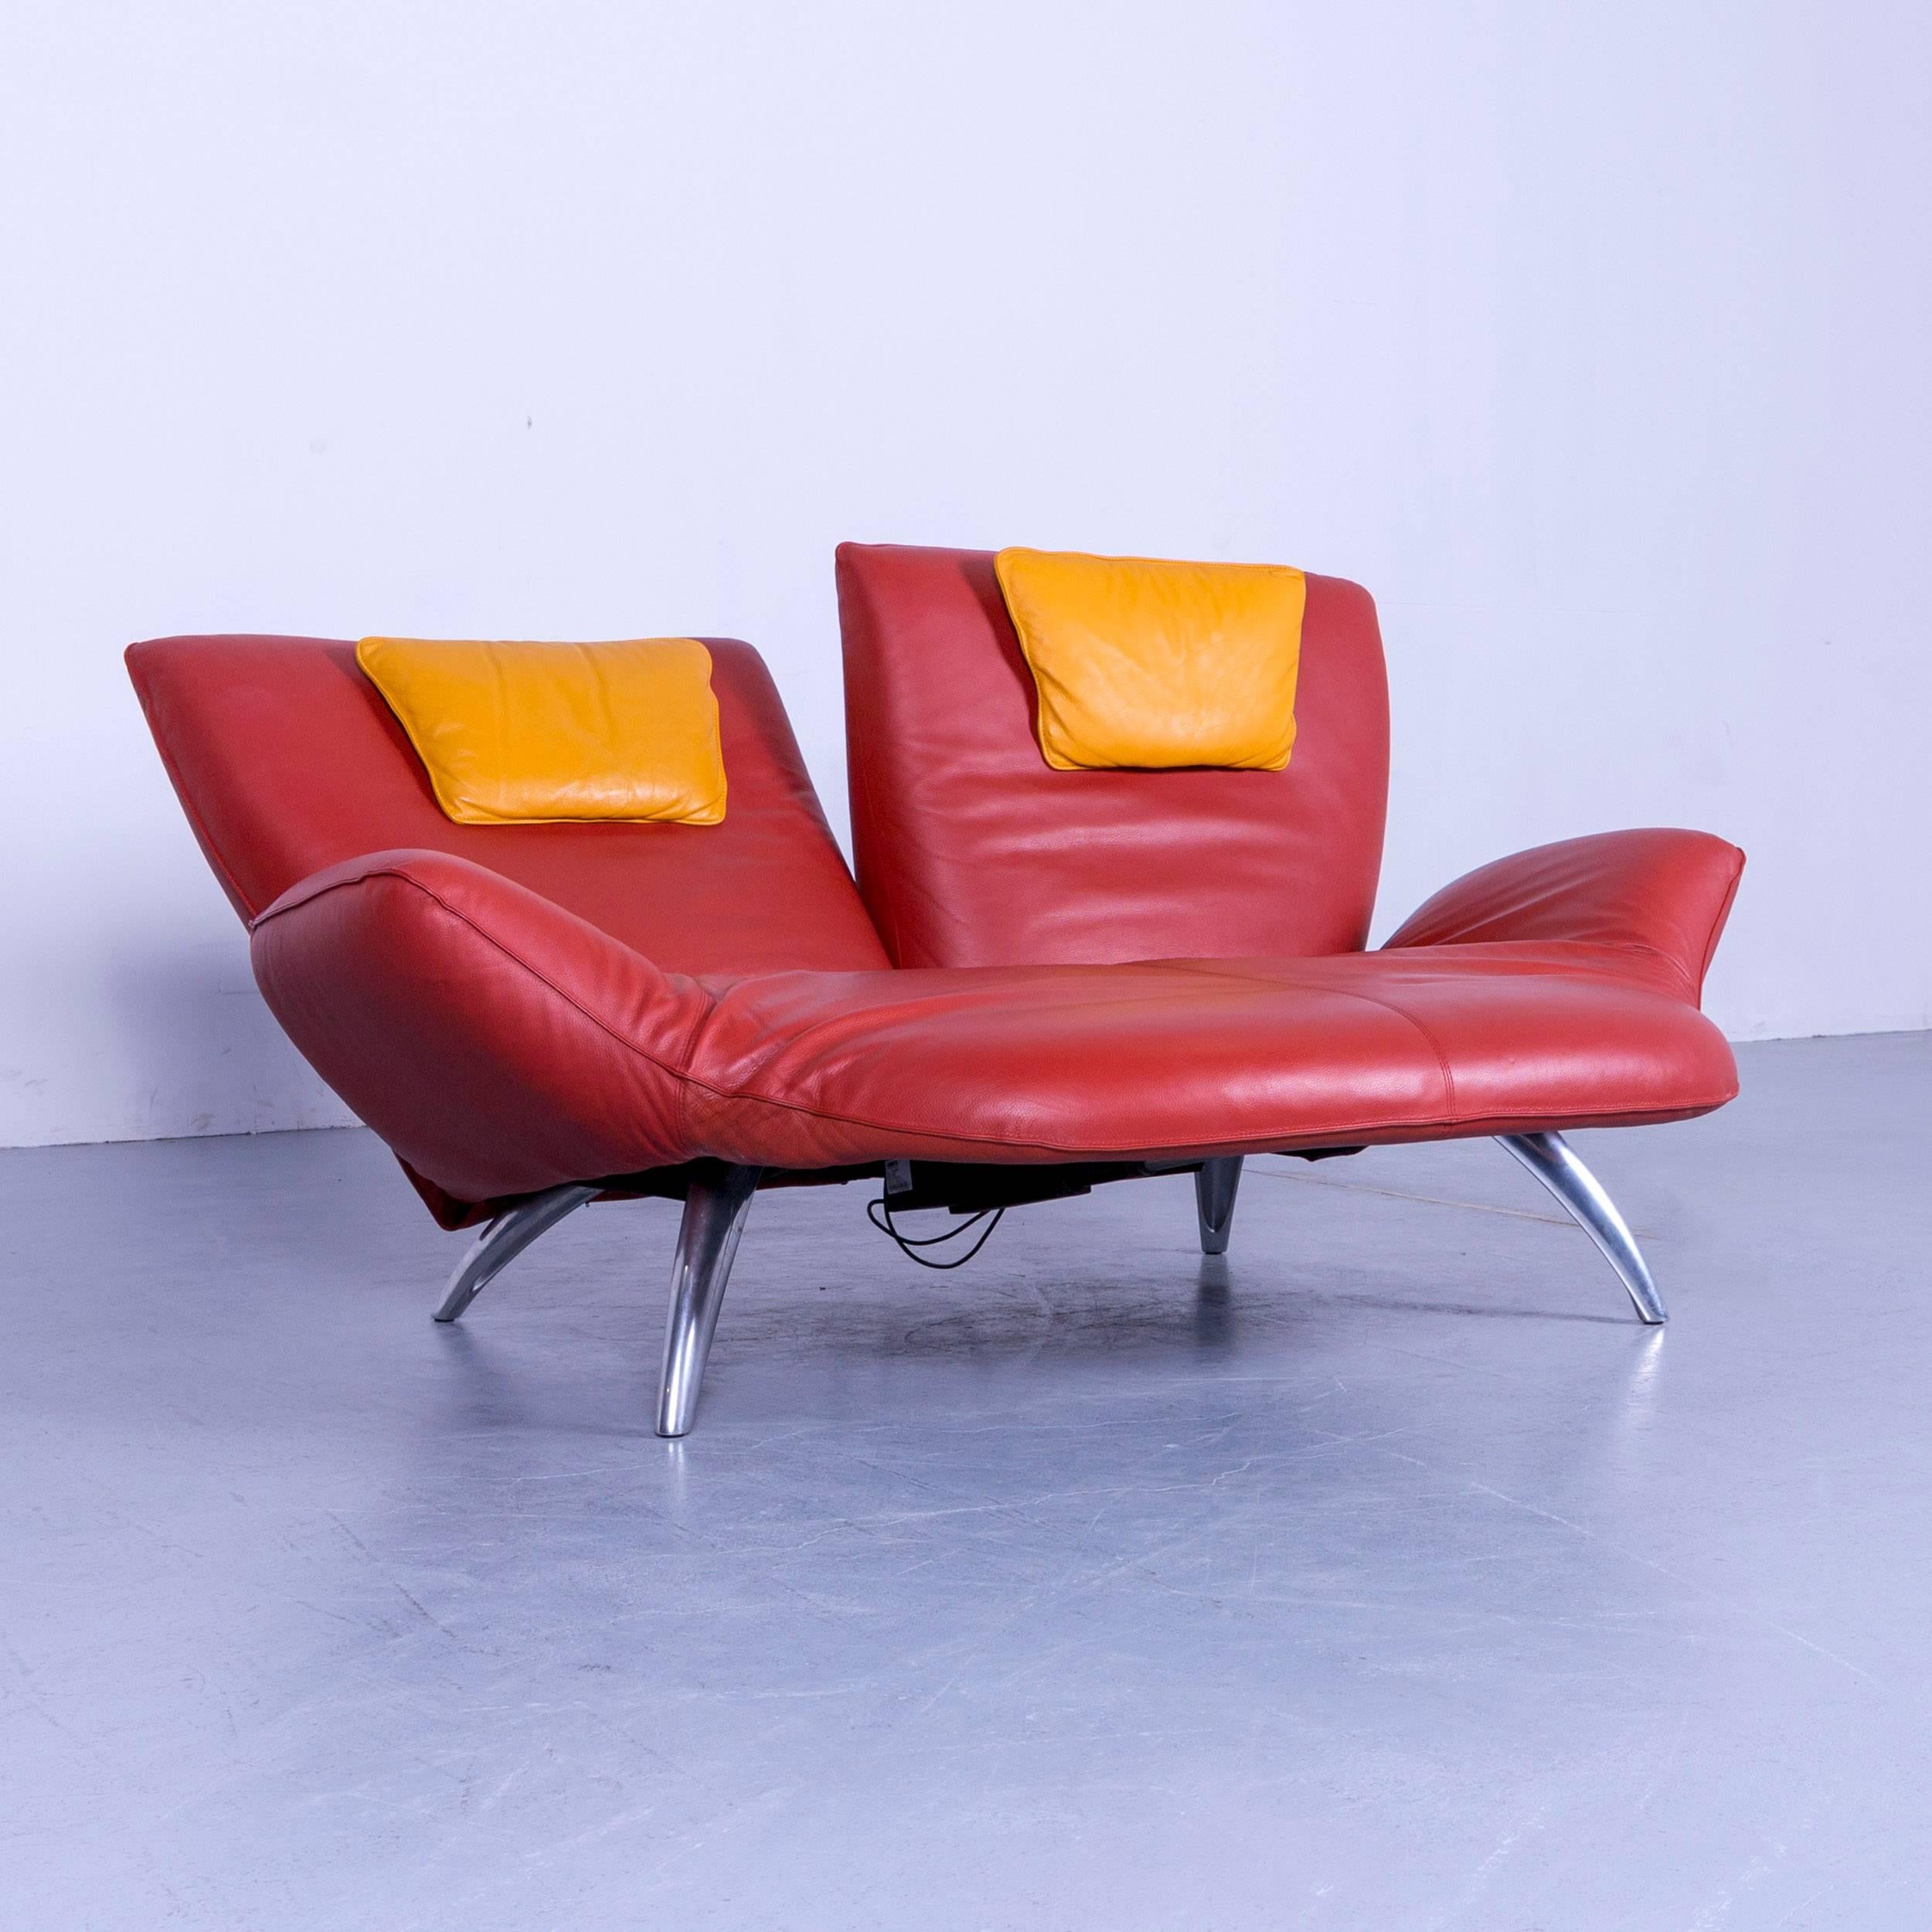 We bring to you an Leolux Panta Rhei leather sofa red yellow two-seat electric recliner.